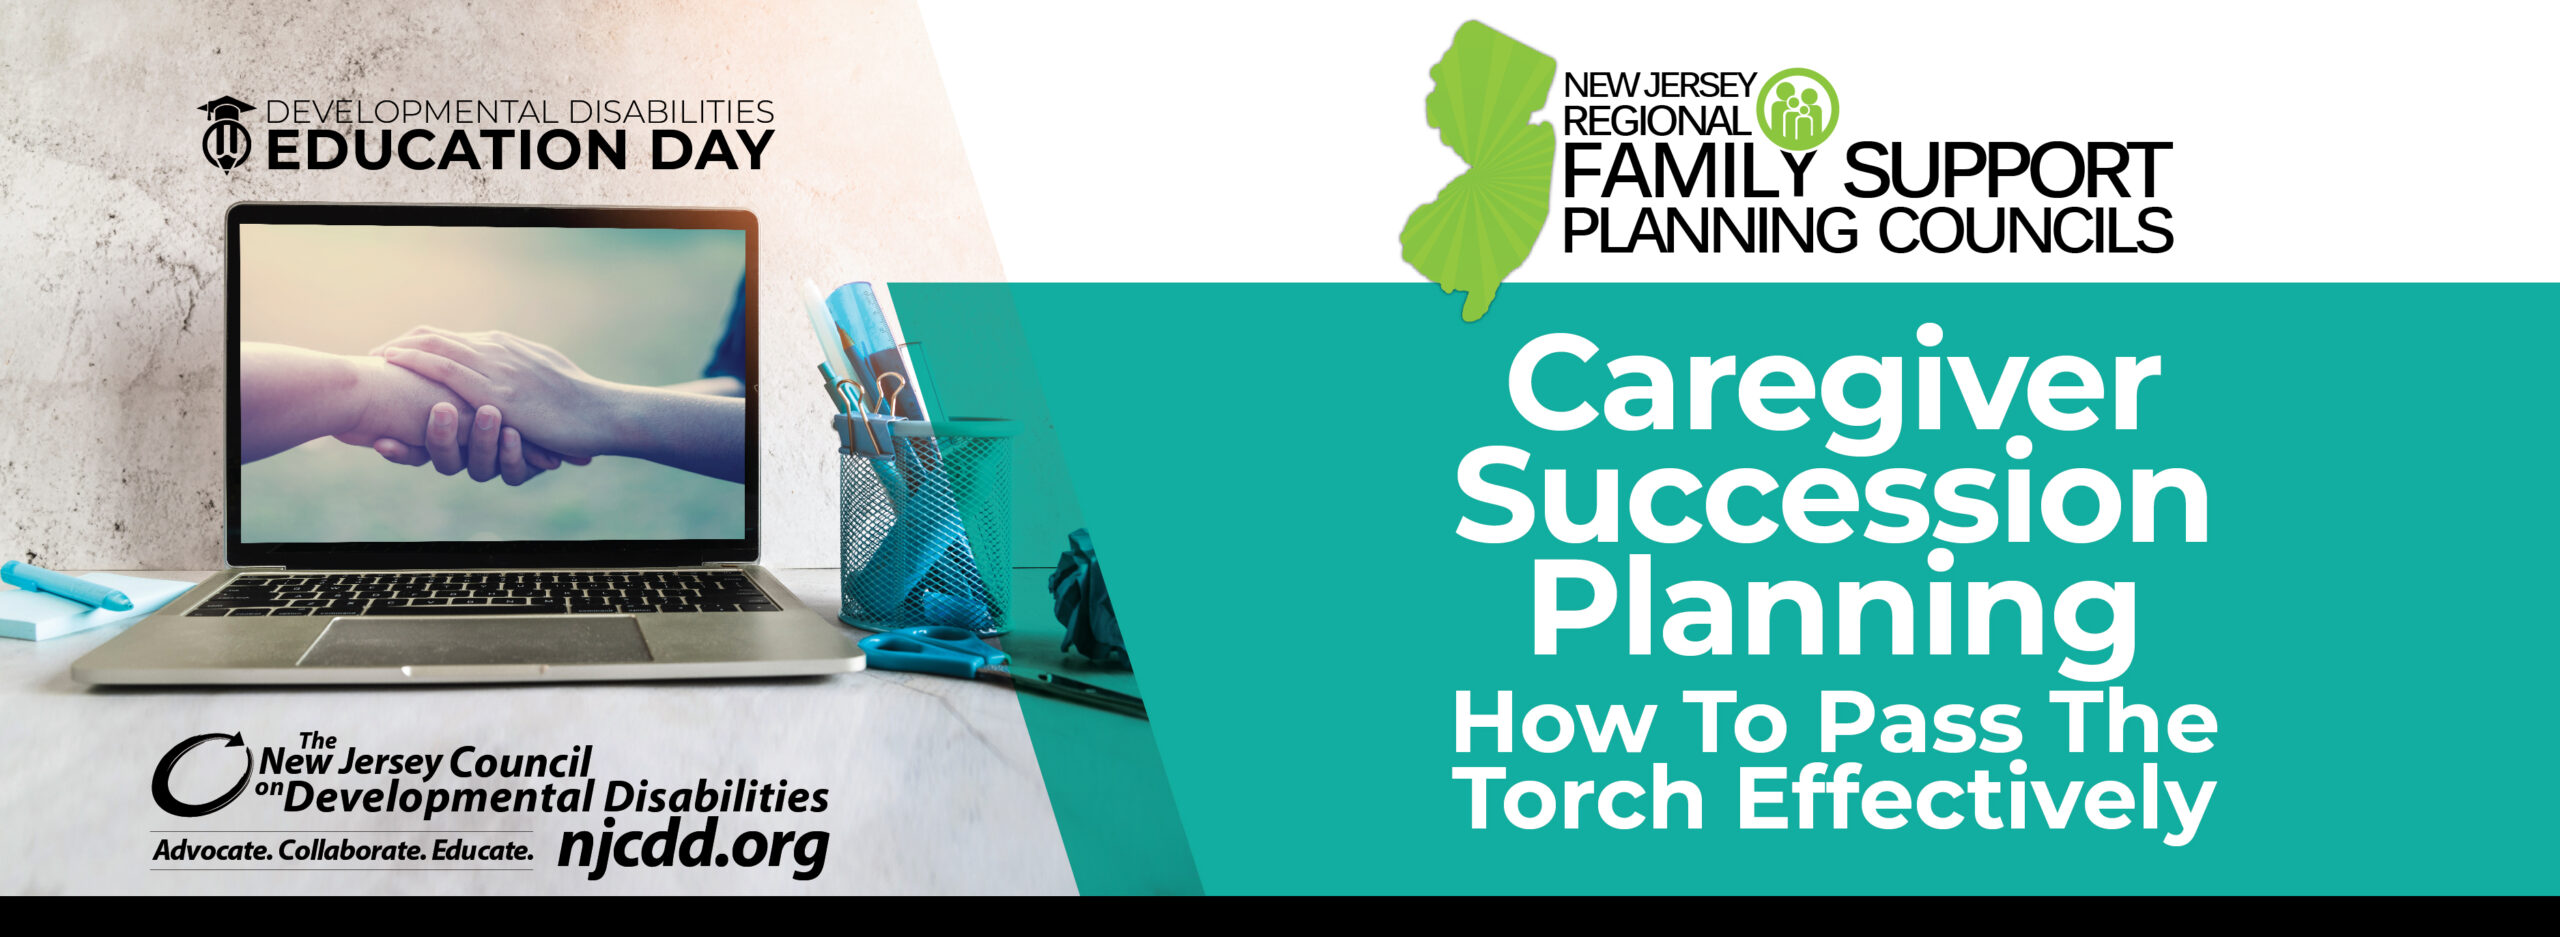 Developmental Disability Education Day How to Pass the Torch Effectively-Resources